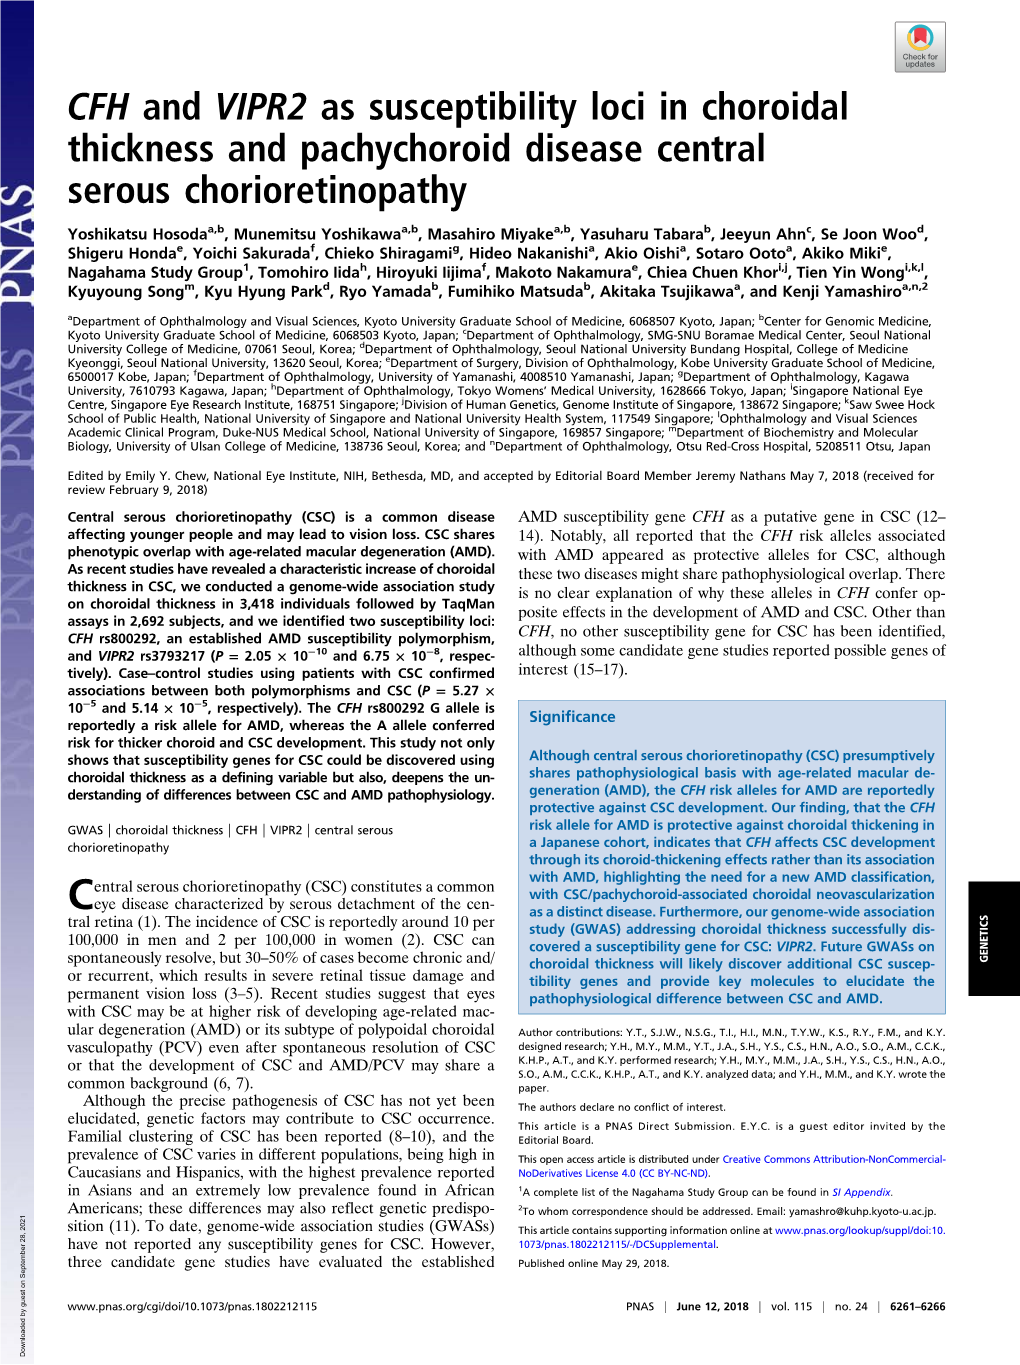 CFH and VIPR2 As Susceptibility Loci in Choroidal Thickness and Pachychoroid Disease Central Serous Chorioretinopathy